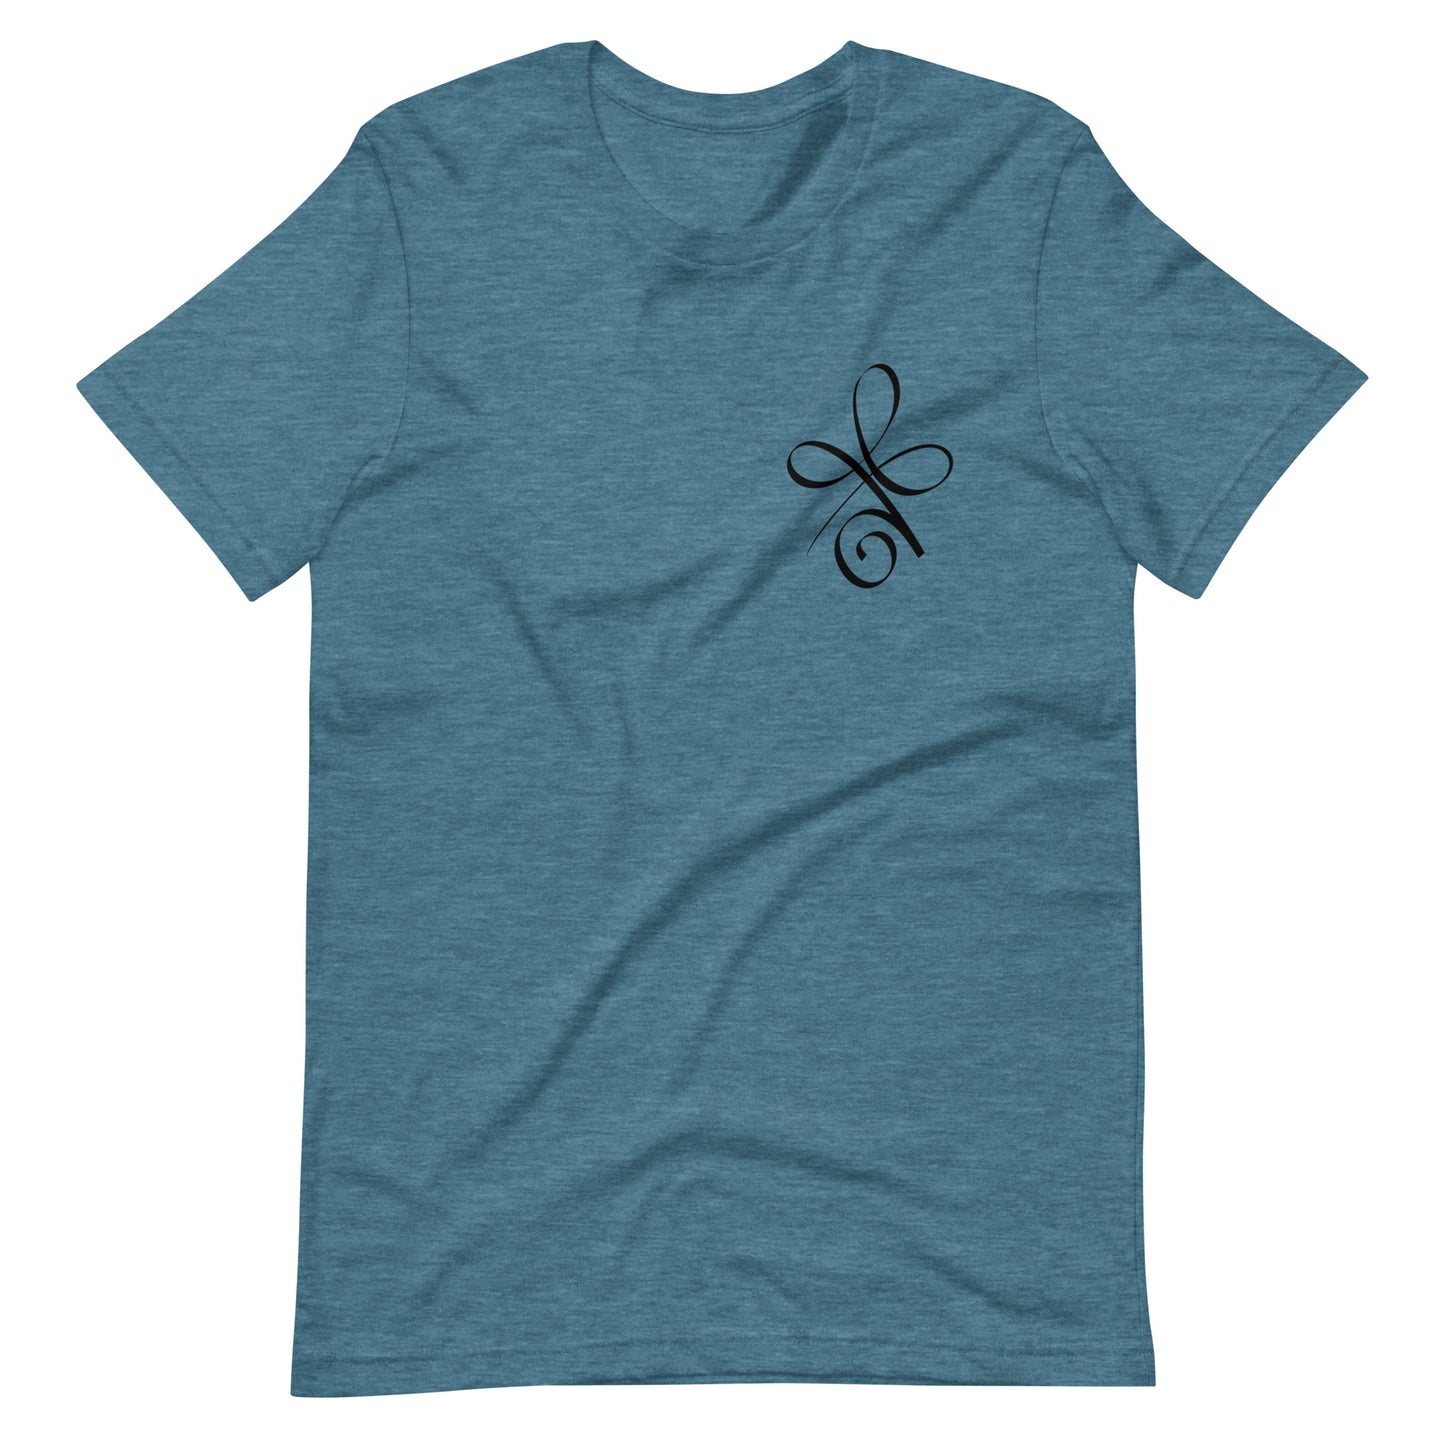 THE SYMBOL OF UNCONDITIONAL LOVE Unisex t-shirt